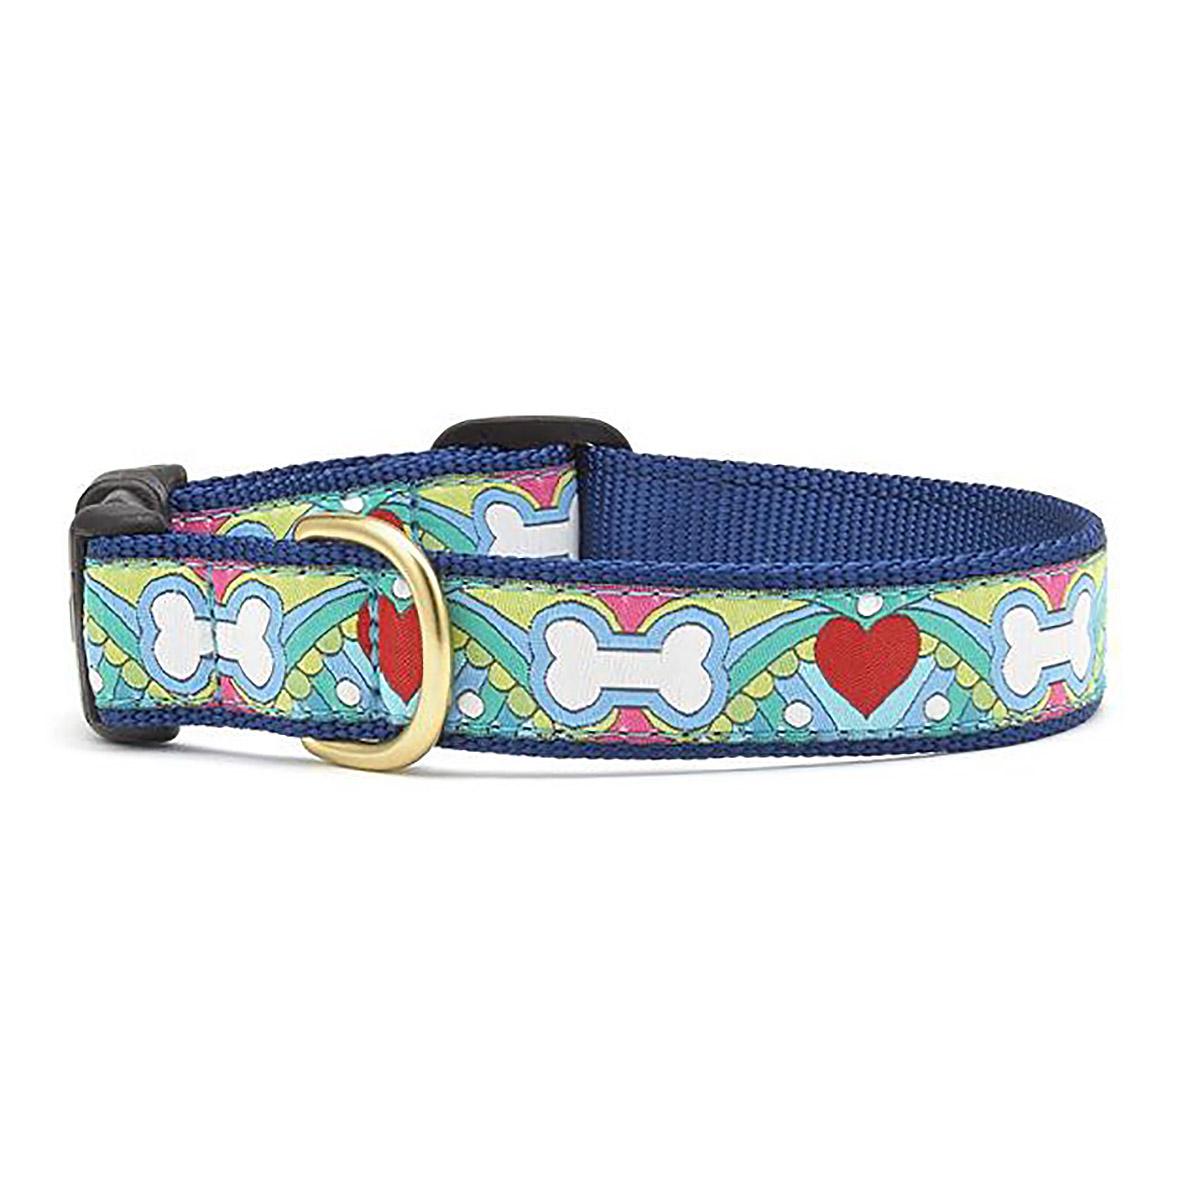 Coloring Book Dog Collar by Up Country